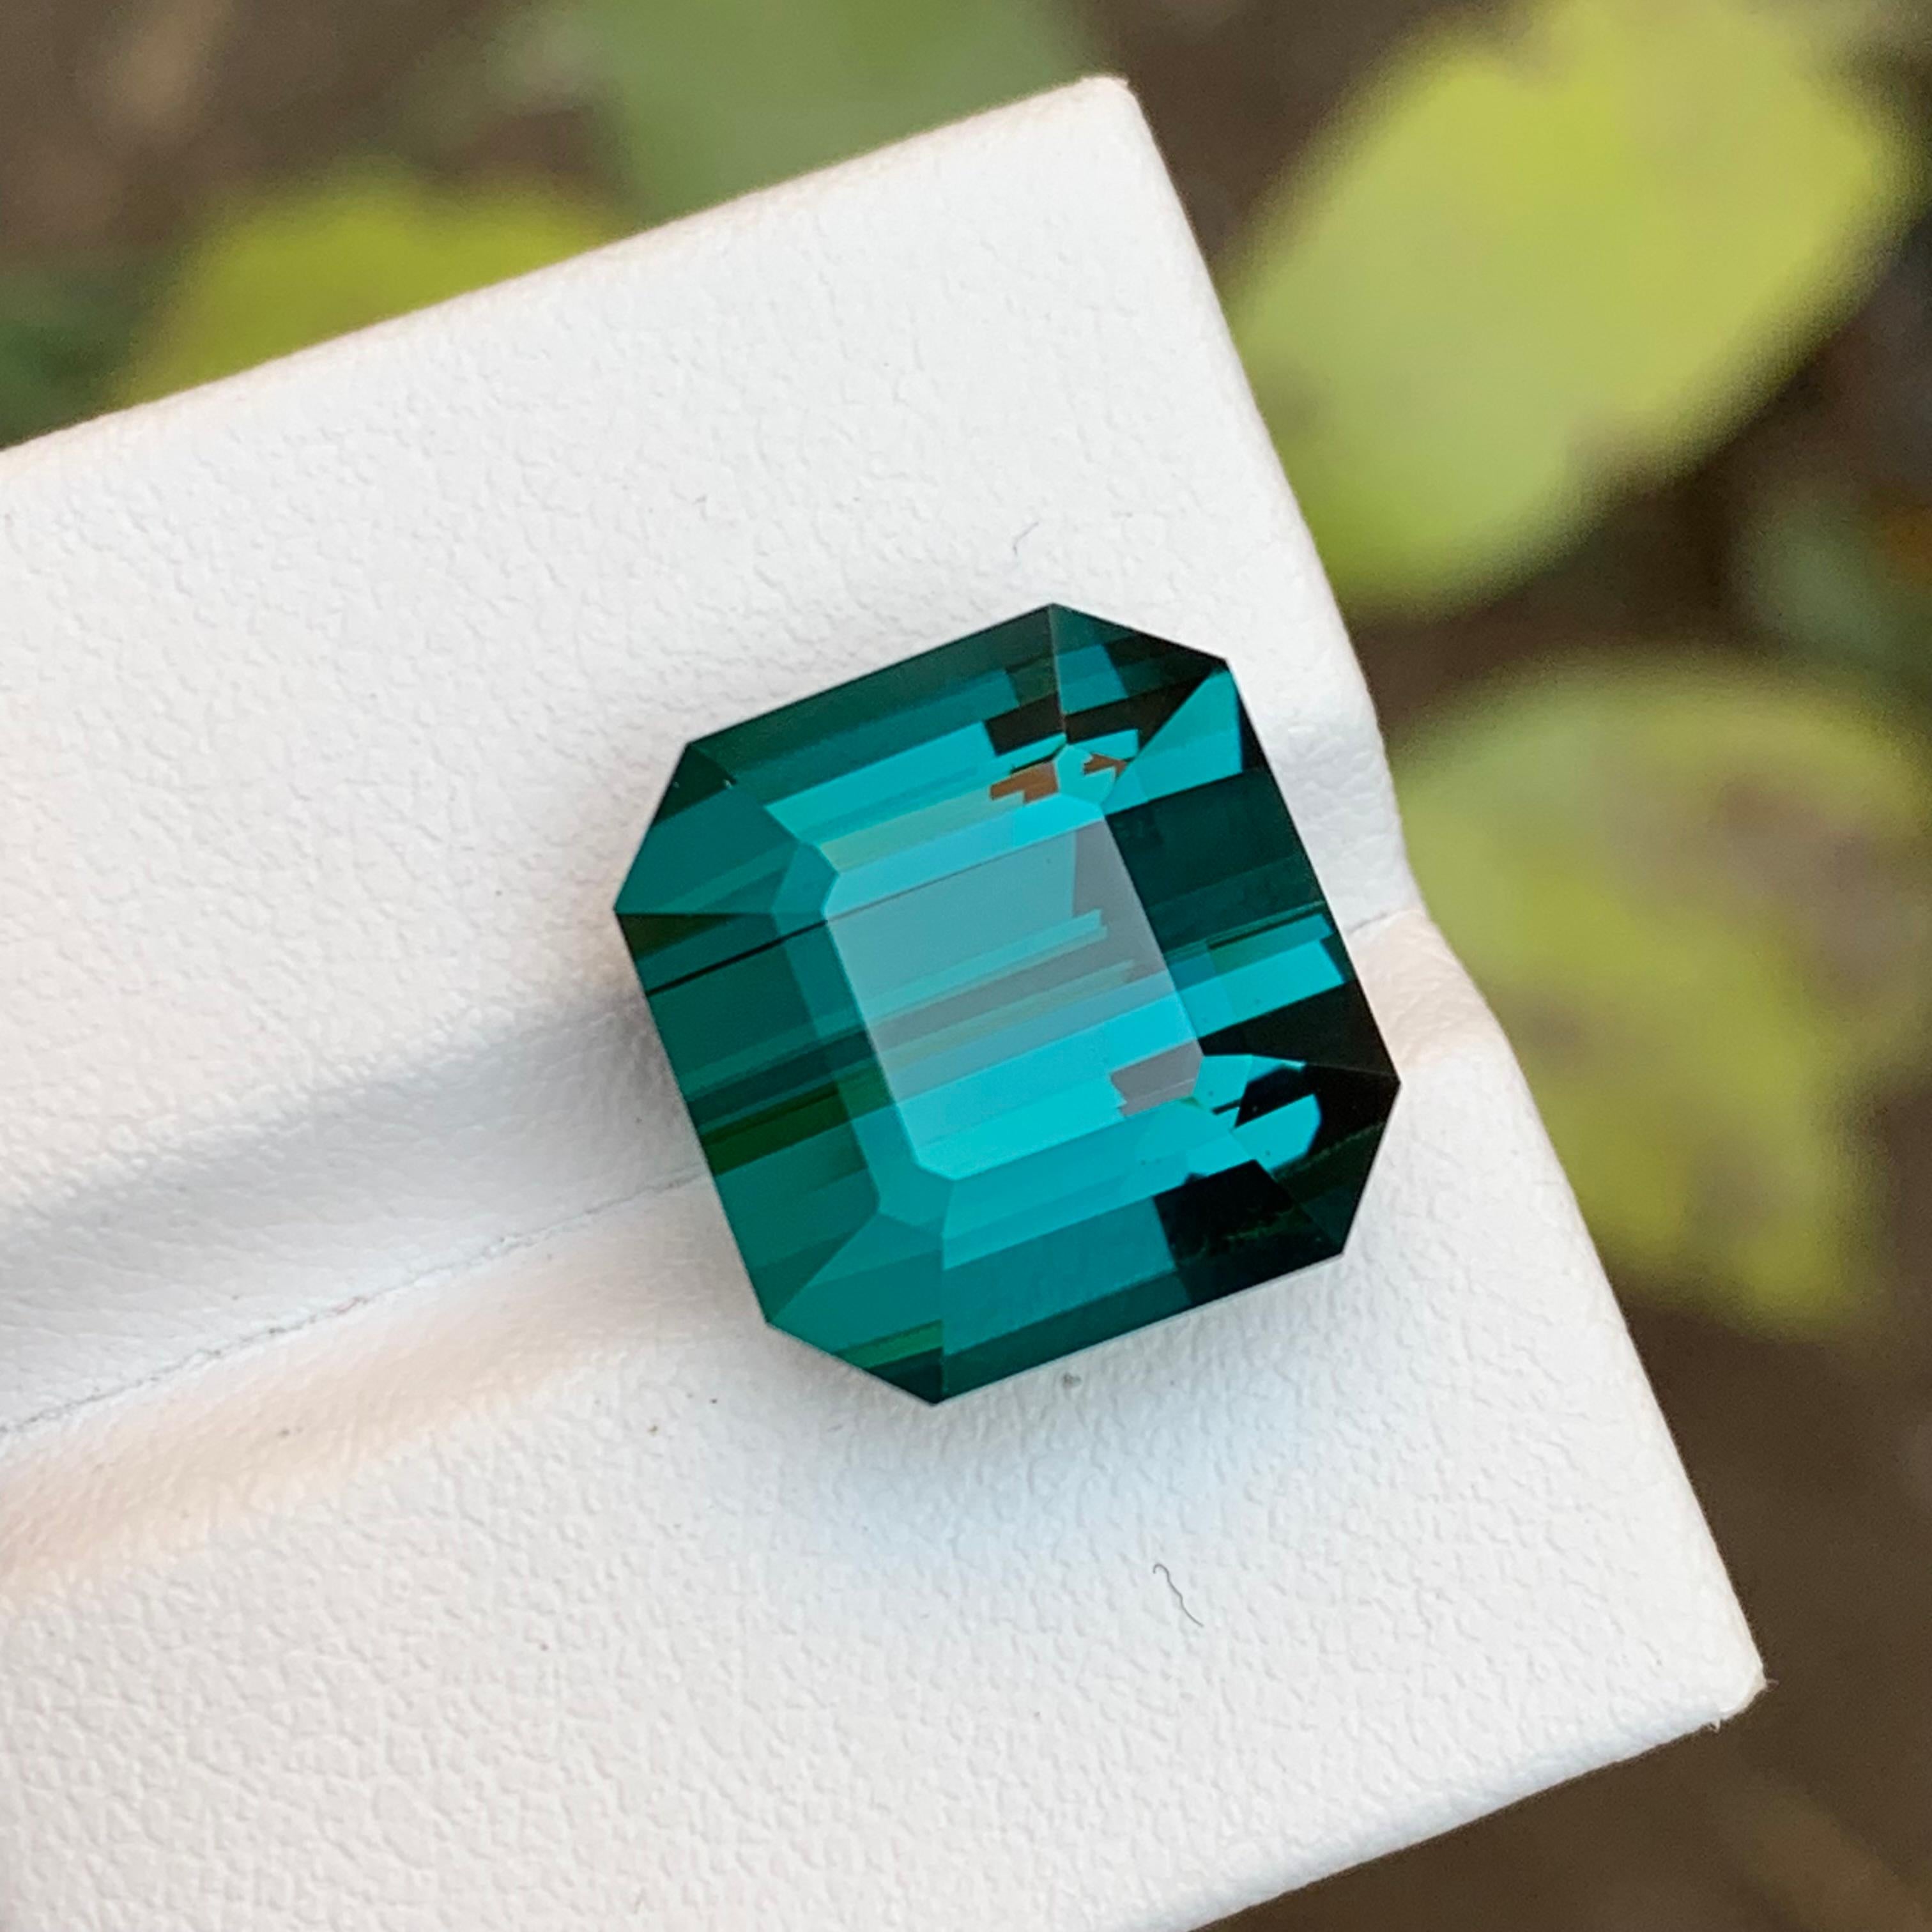 GEMSTONE TYPE: Tourmaline
PIECE(S): 1
WEIGHT: 15.30 Carats
SHAPE: Emerald
SIZE (MM):  13.02 x 13.83 x 10.03
COLOR: Teal Blue
CLARITY: Loupe Clean
TREATMENT: Not treated
ORIGIN: Afghanistan
CERTIFICATE: On demand

Behold, a treasure nestled amidst